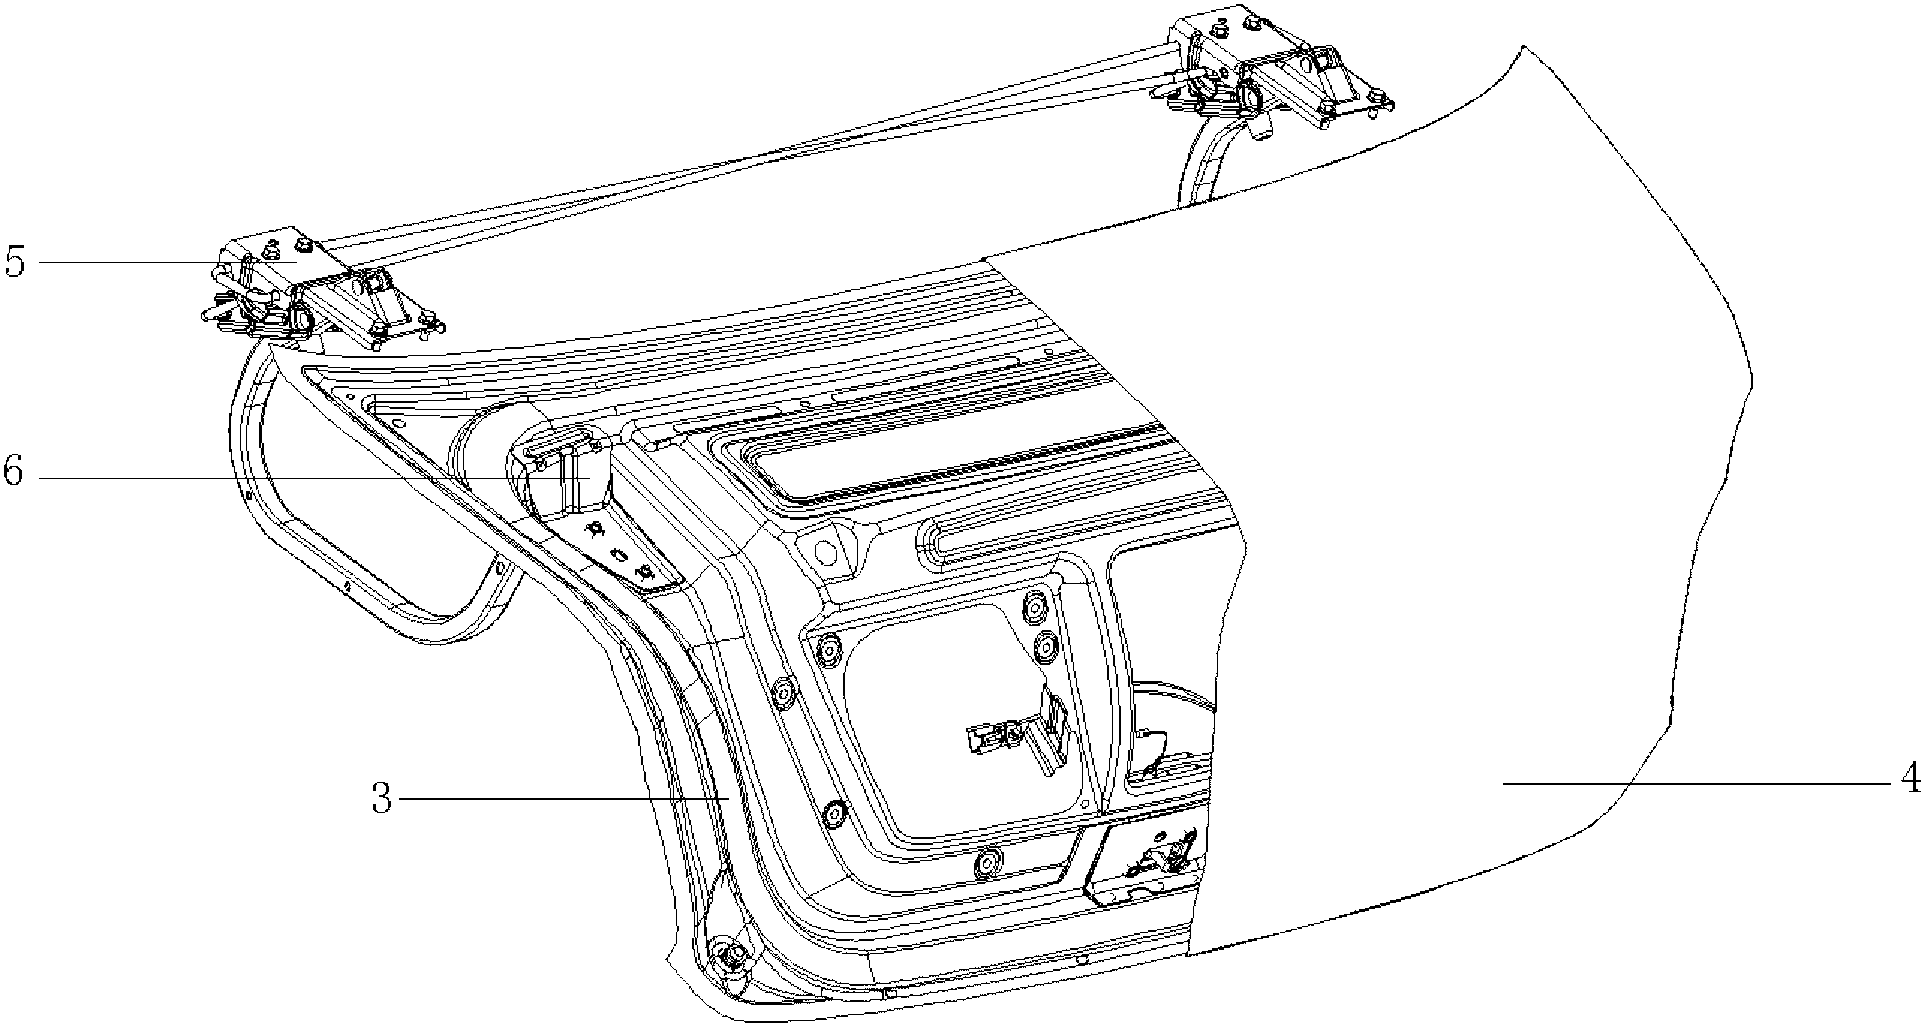 Integrated vehicle trunk lid hinge reinforcing plate support structure